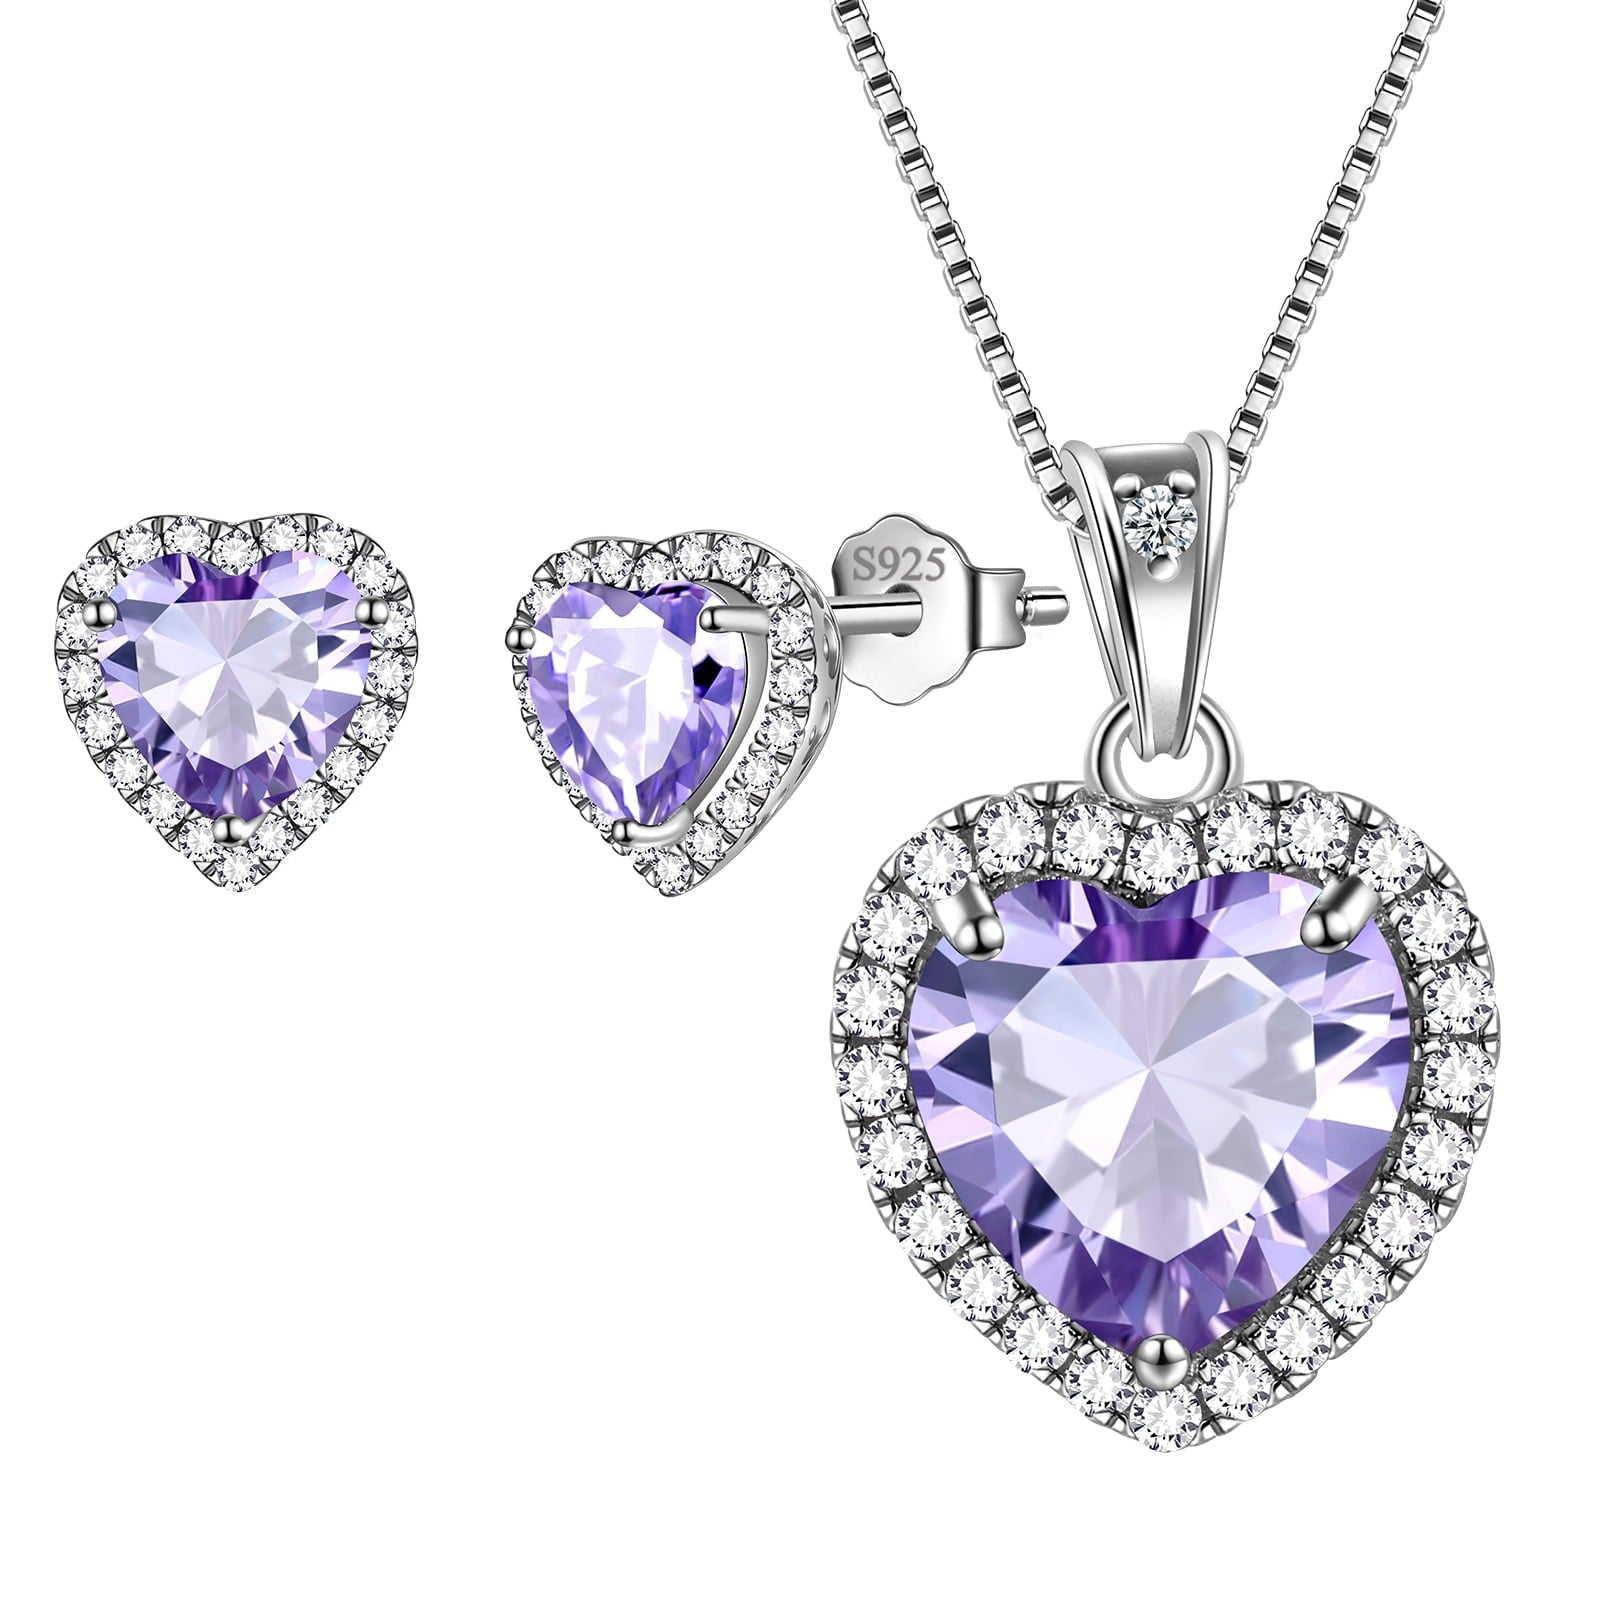 June Birthstone Jewelry Sets for Women, Alexandrite Heart Jewelry Set Necklace Earrings 925 Sterling Silver Jewelry Girls Birthday Valentine's Day Gifts